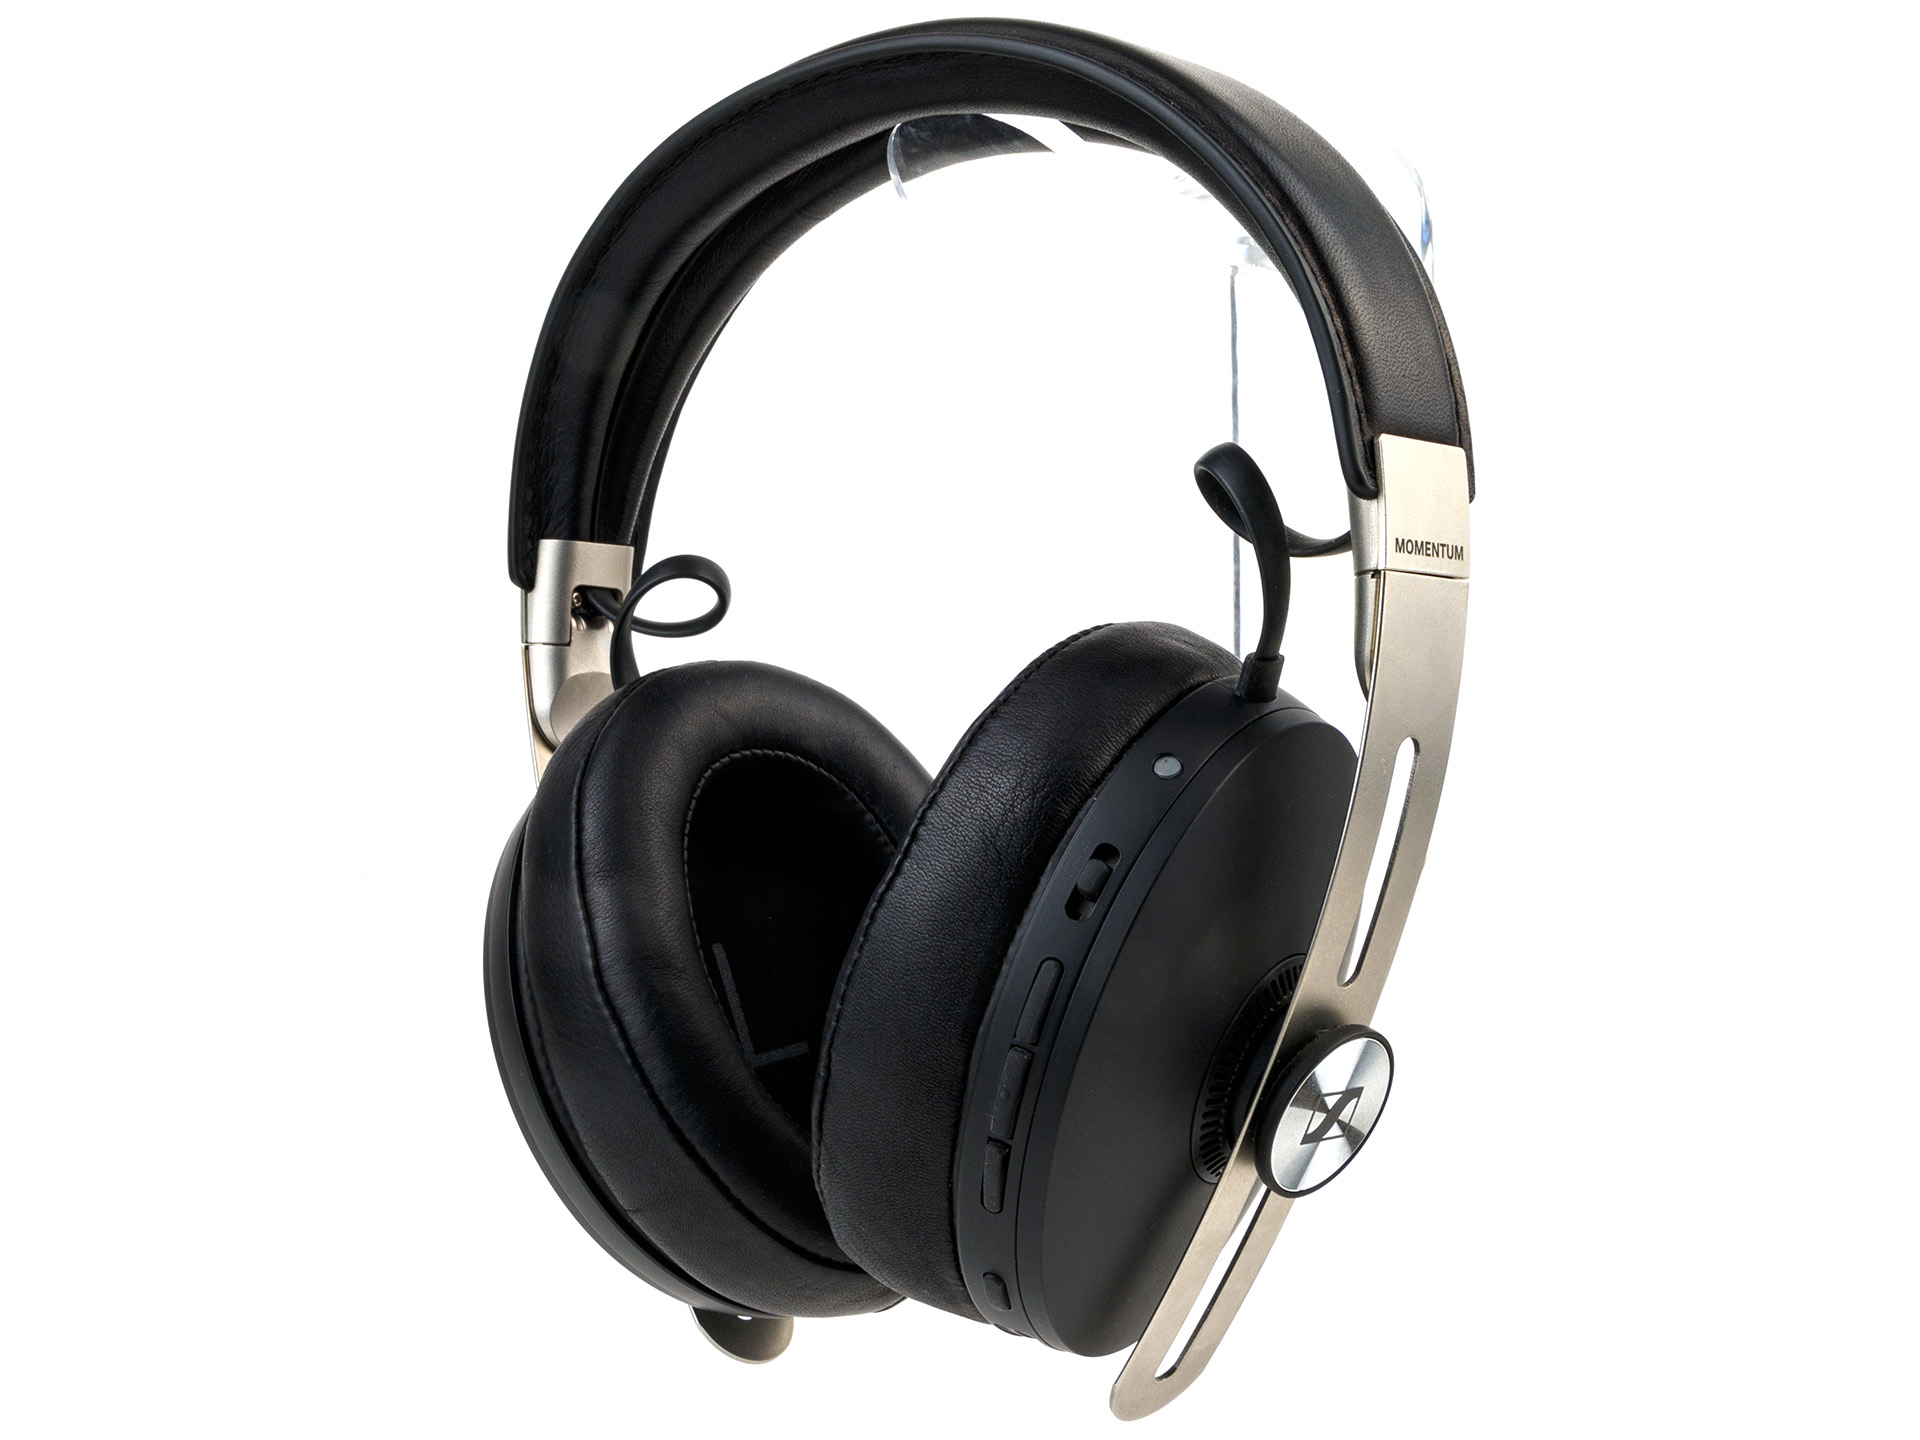 Sennheiser Momentum 3 Wireless Review - Strong ANC headphones with 